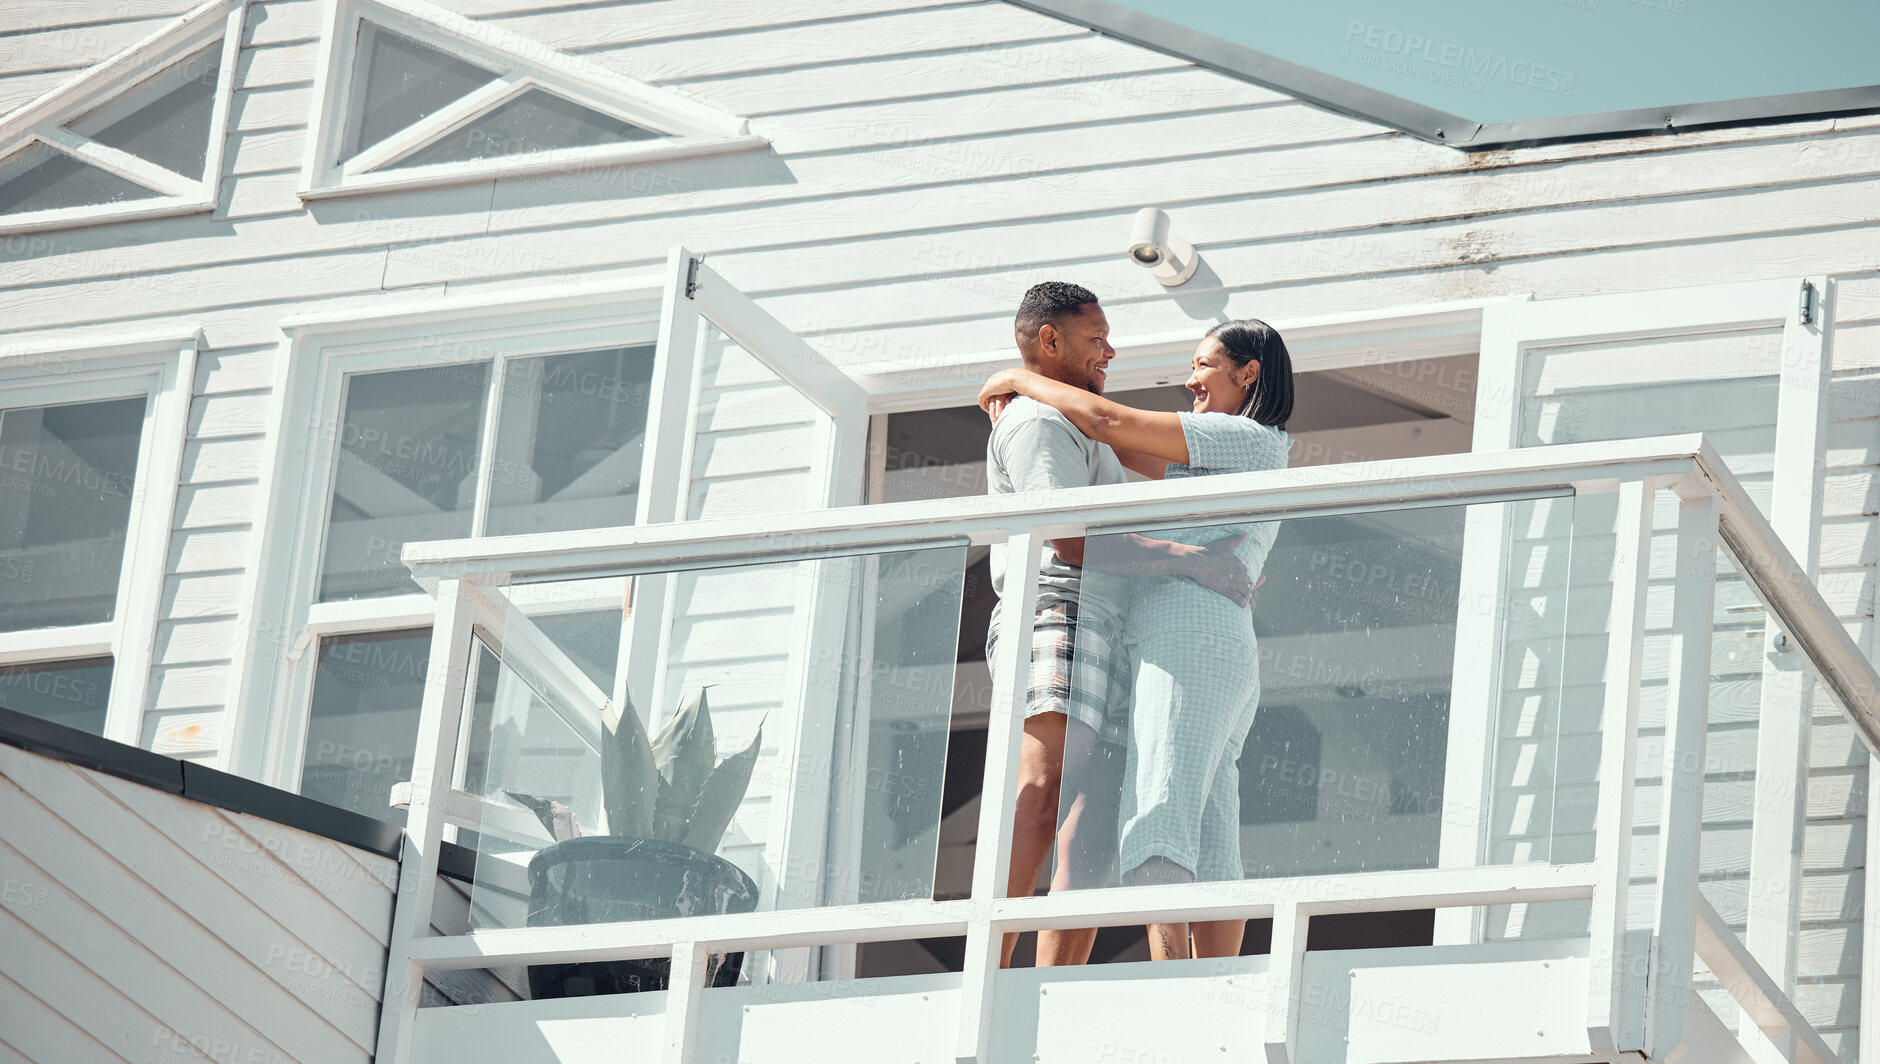 Buy stock photo Loving young mixed race couple in pyjamas sharing romantic moment while dancing on the balcony of their new home or while on holiday enjoying their honeymoon